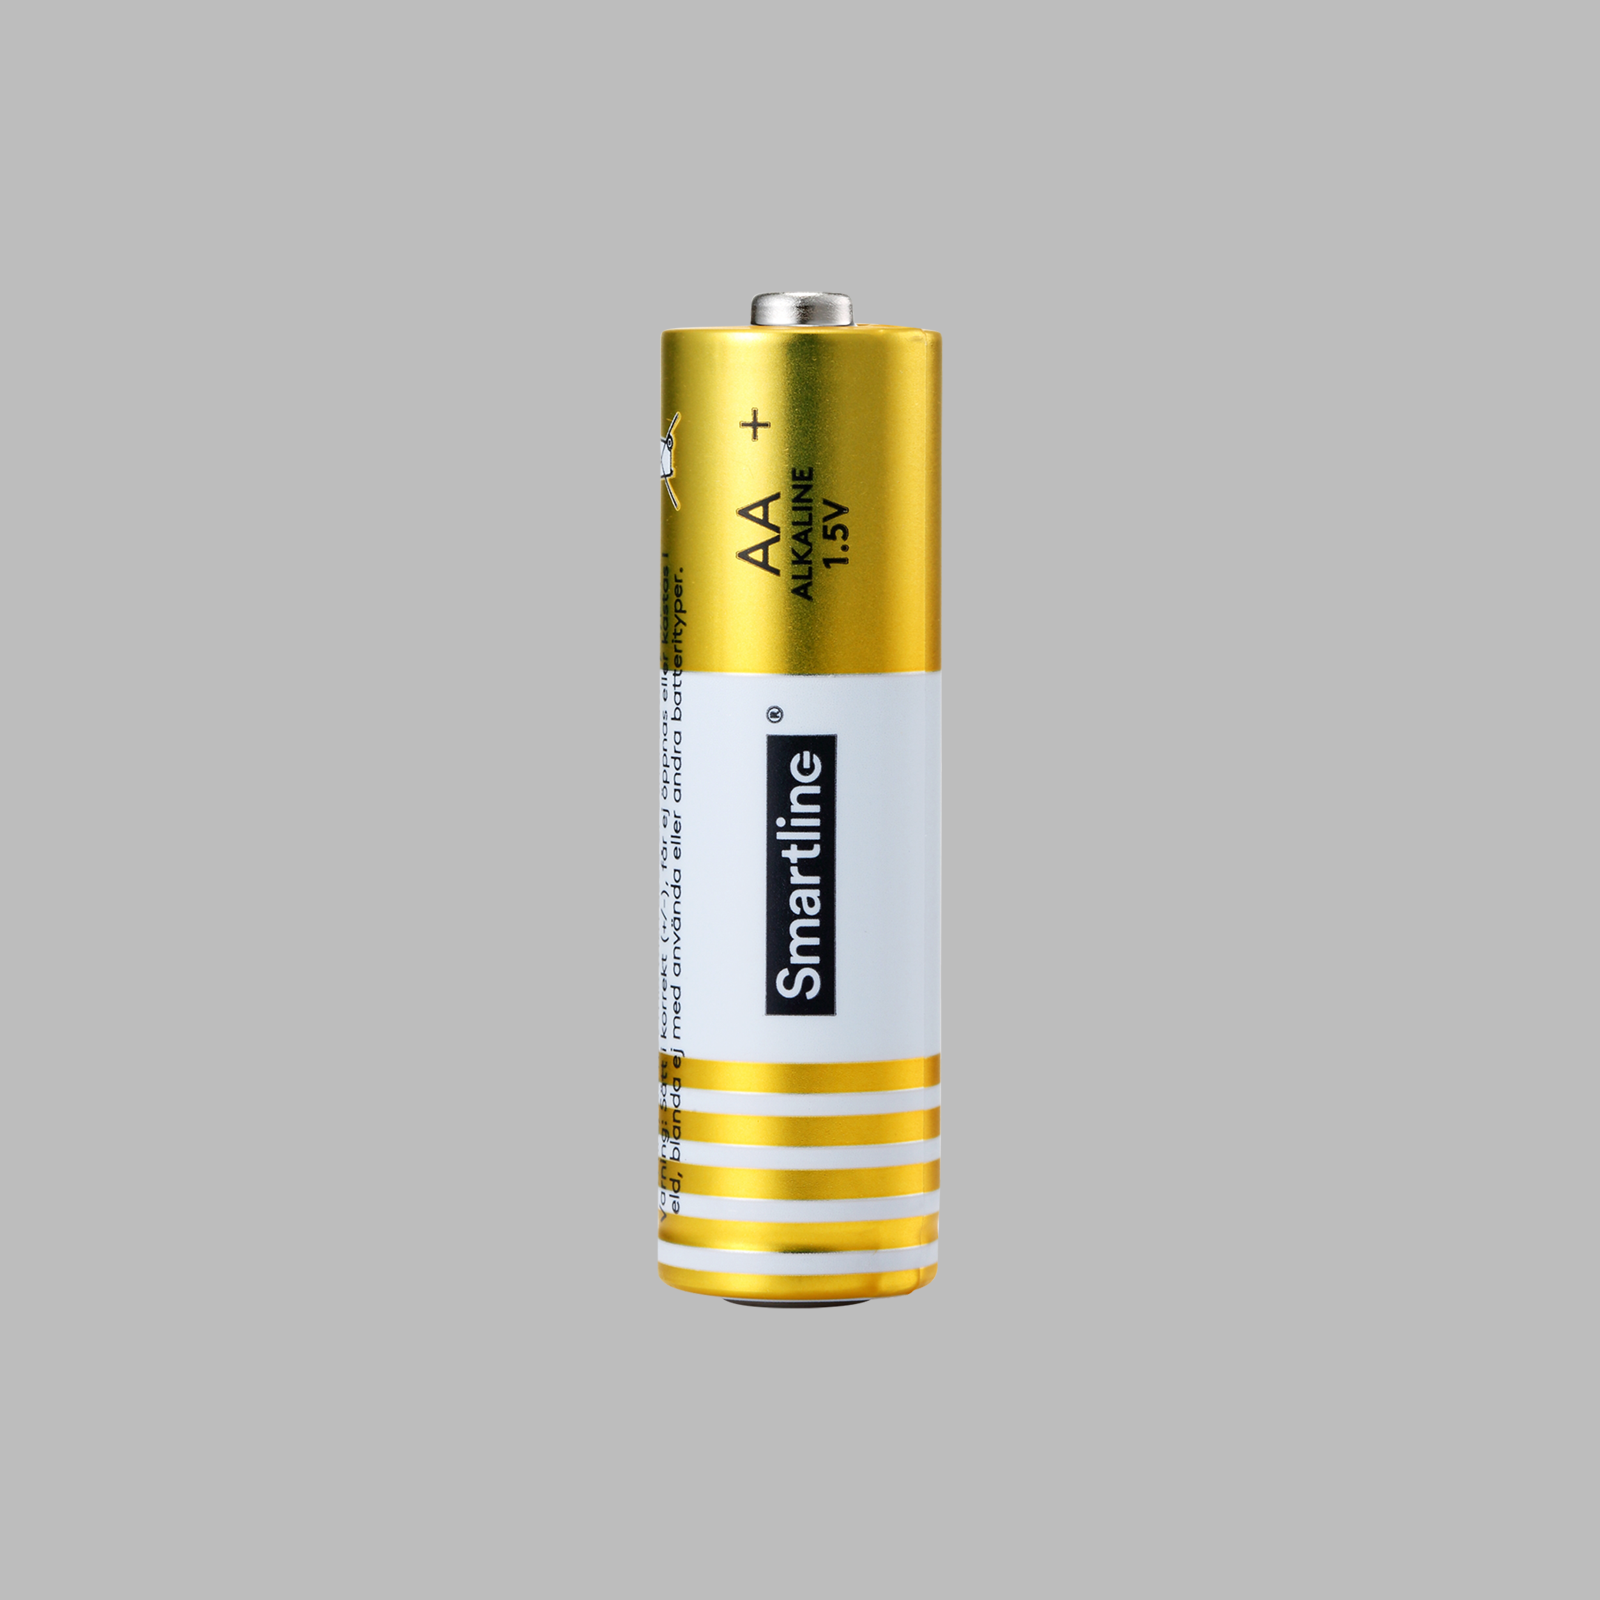 Rechargeable USB AA/LR06 batteries - Solar Brother